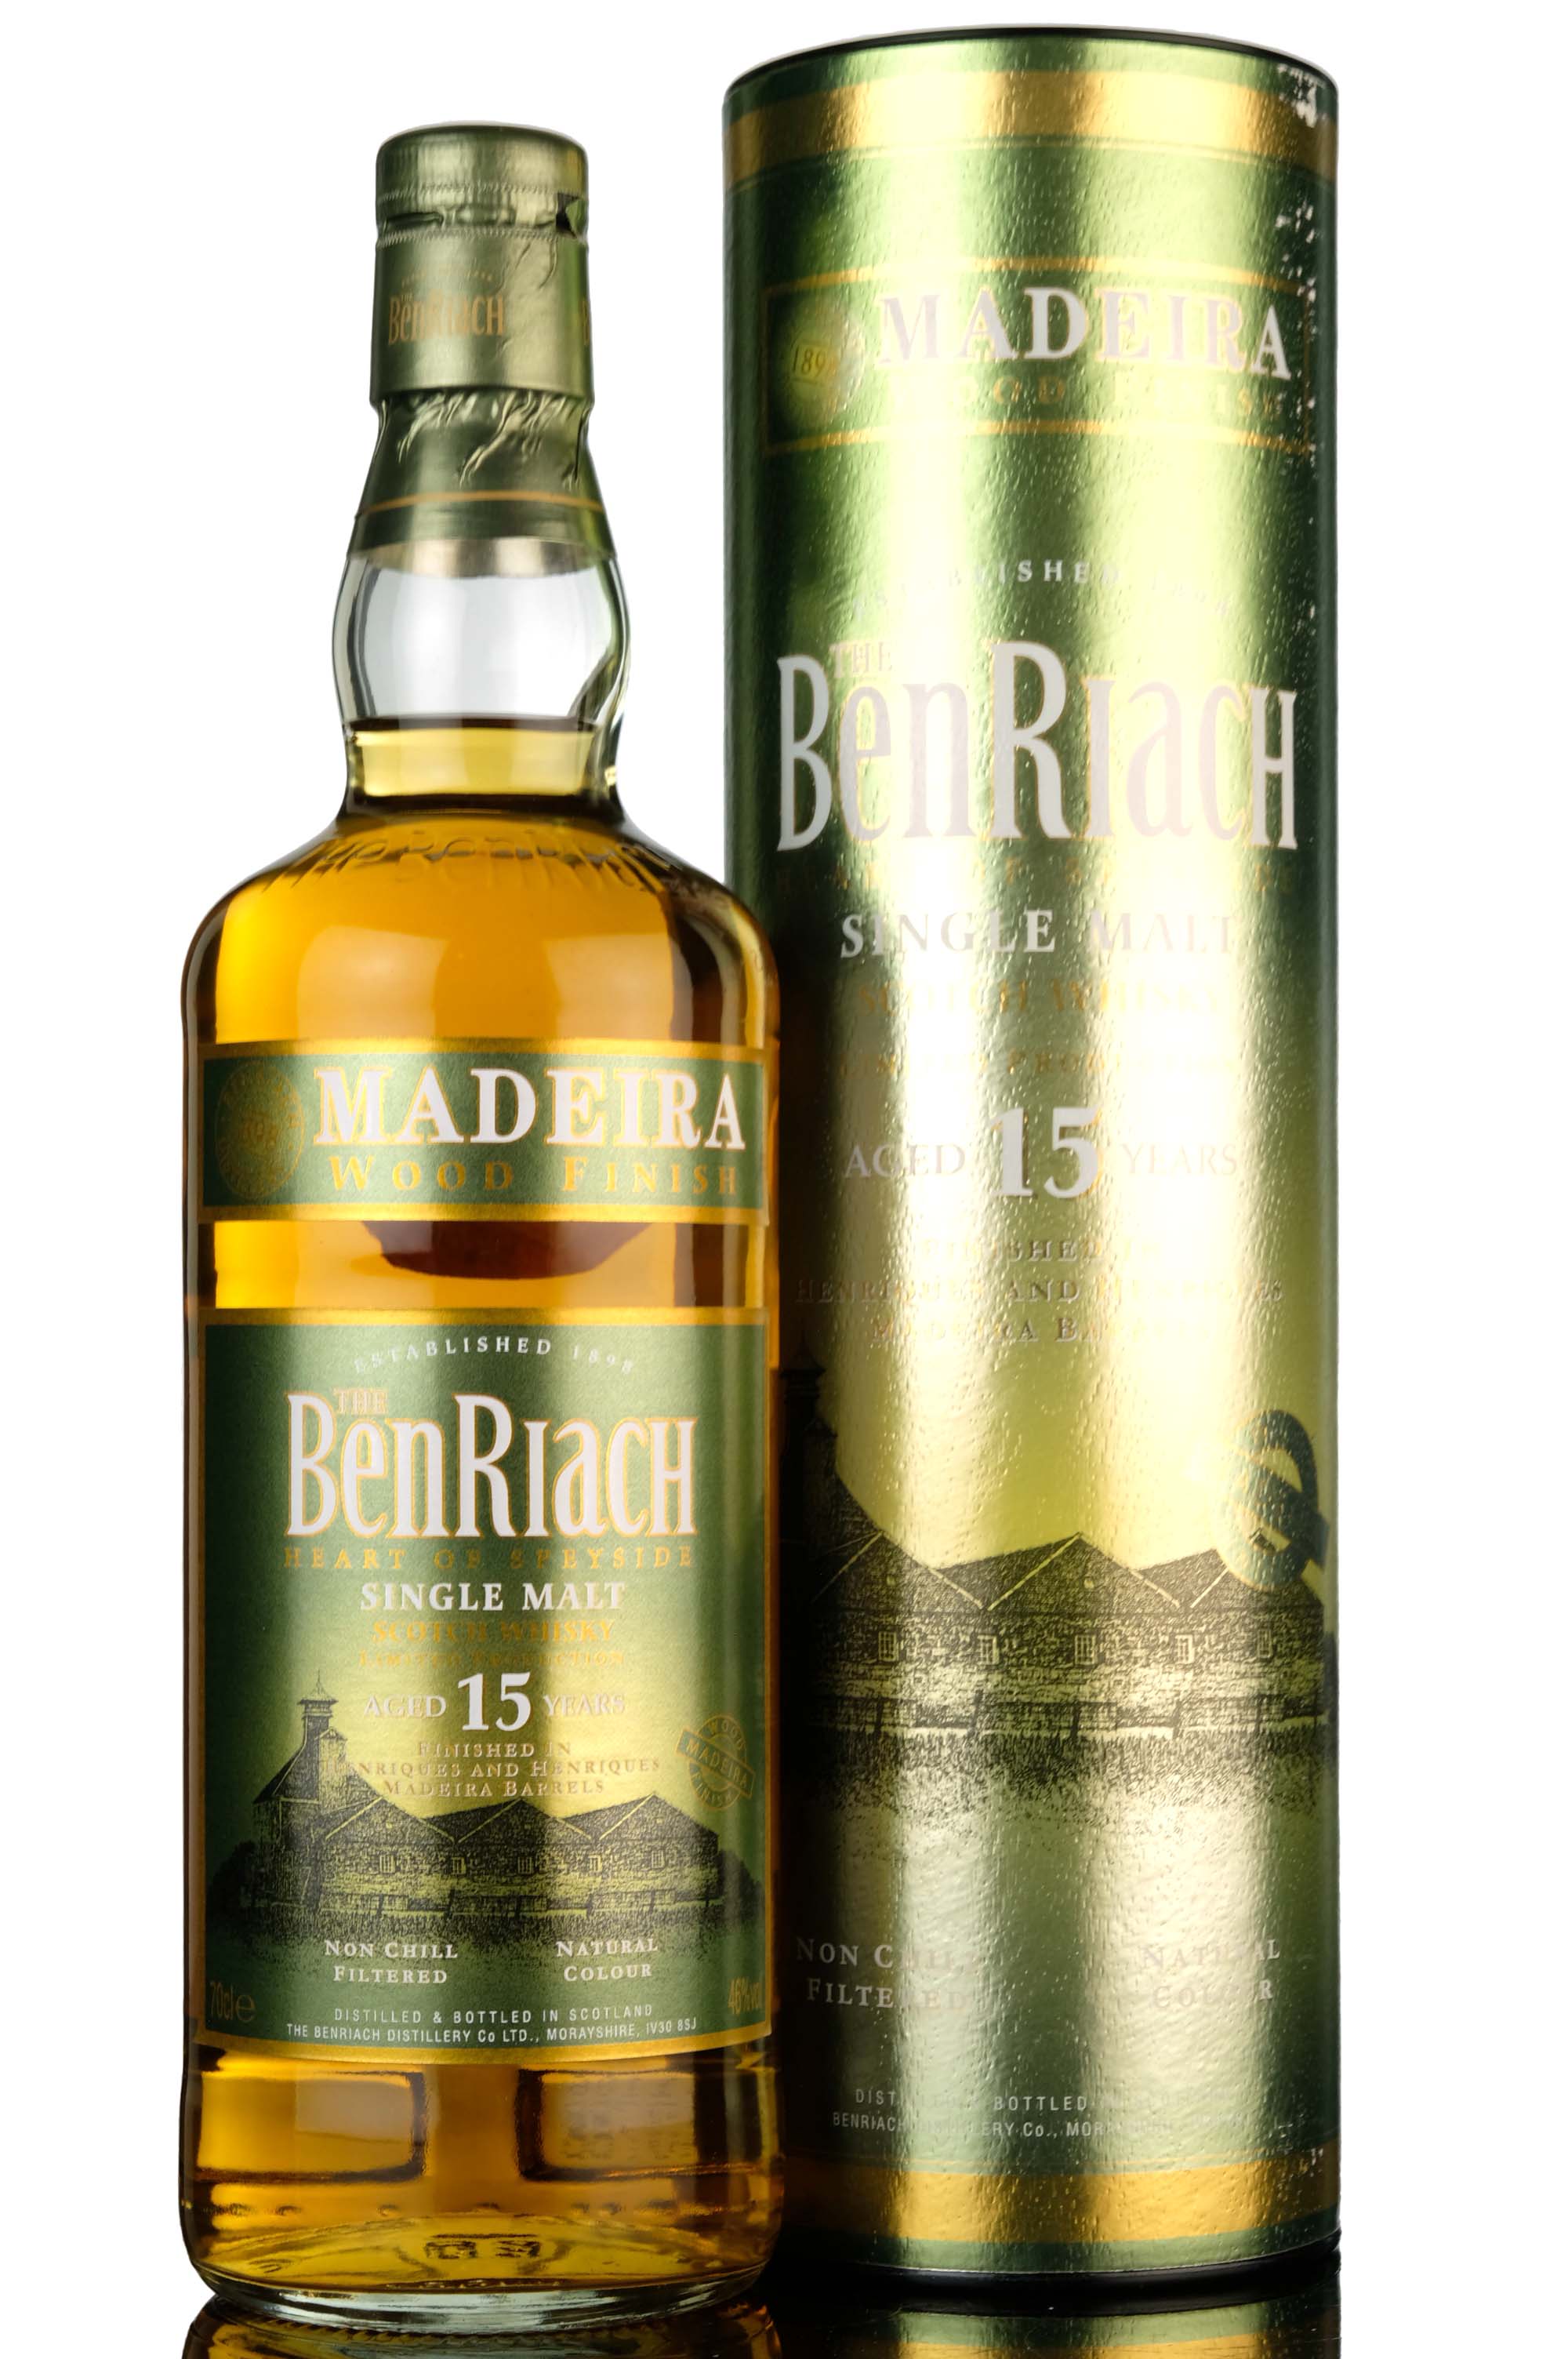 Benriach 15 Year Old - Madeira Wood Finish